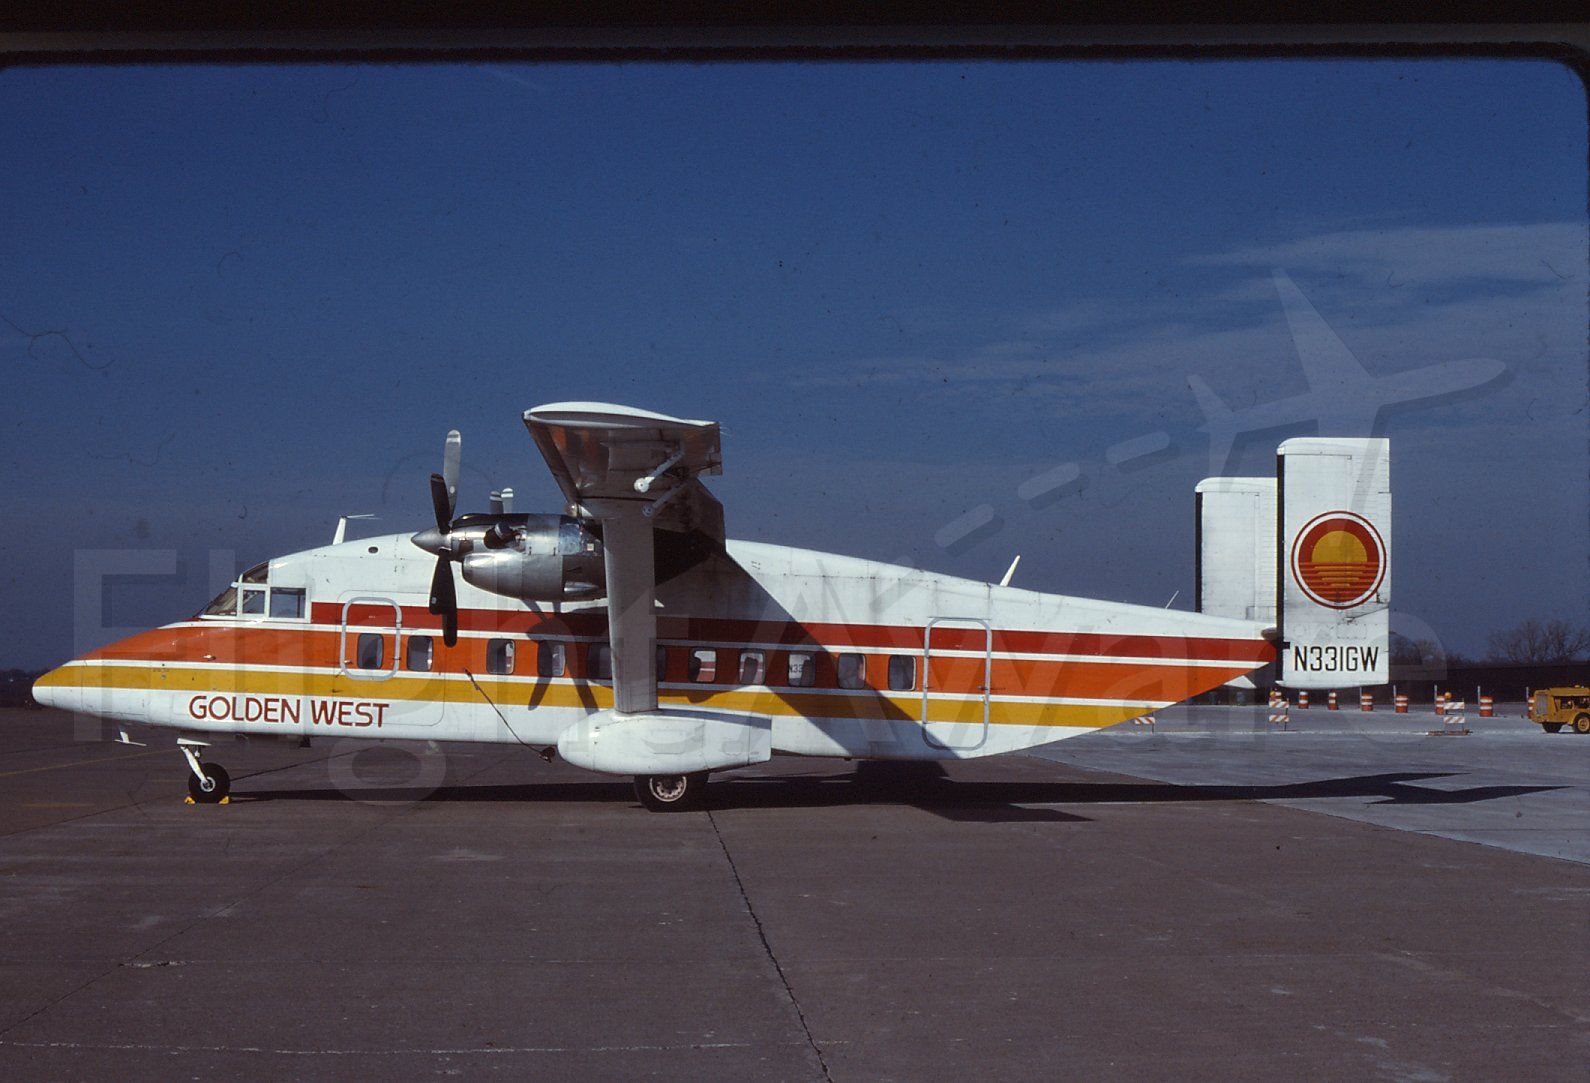 IAI 1124 Westwind (N331GW) - Golden West 26 Nov 84  I flew on this aircraft on GQ831 from ONT to LAX